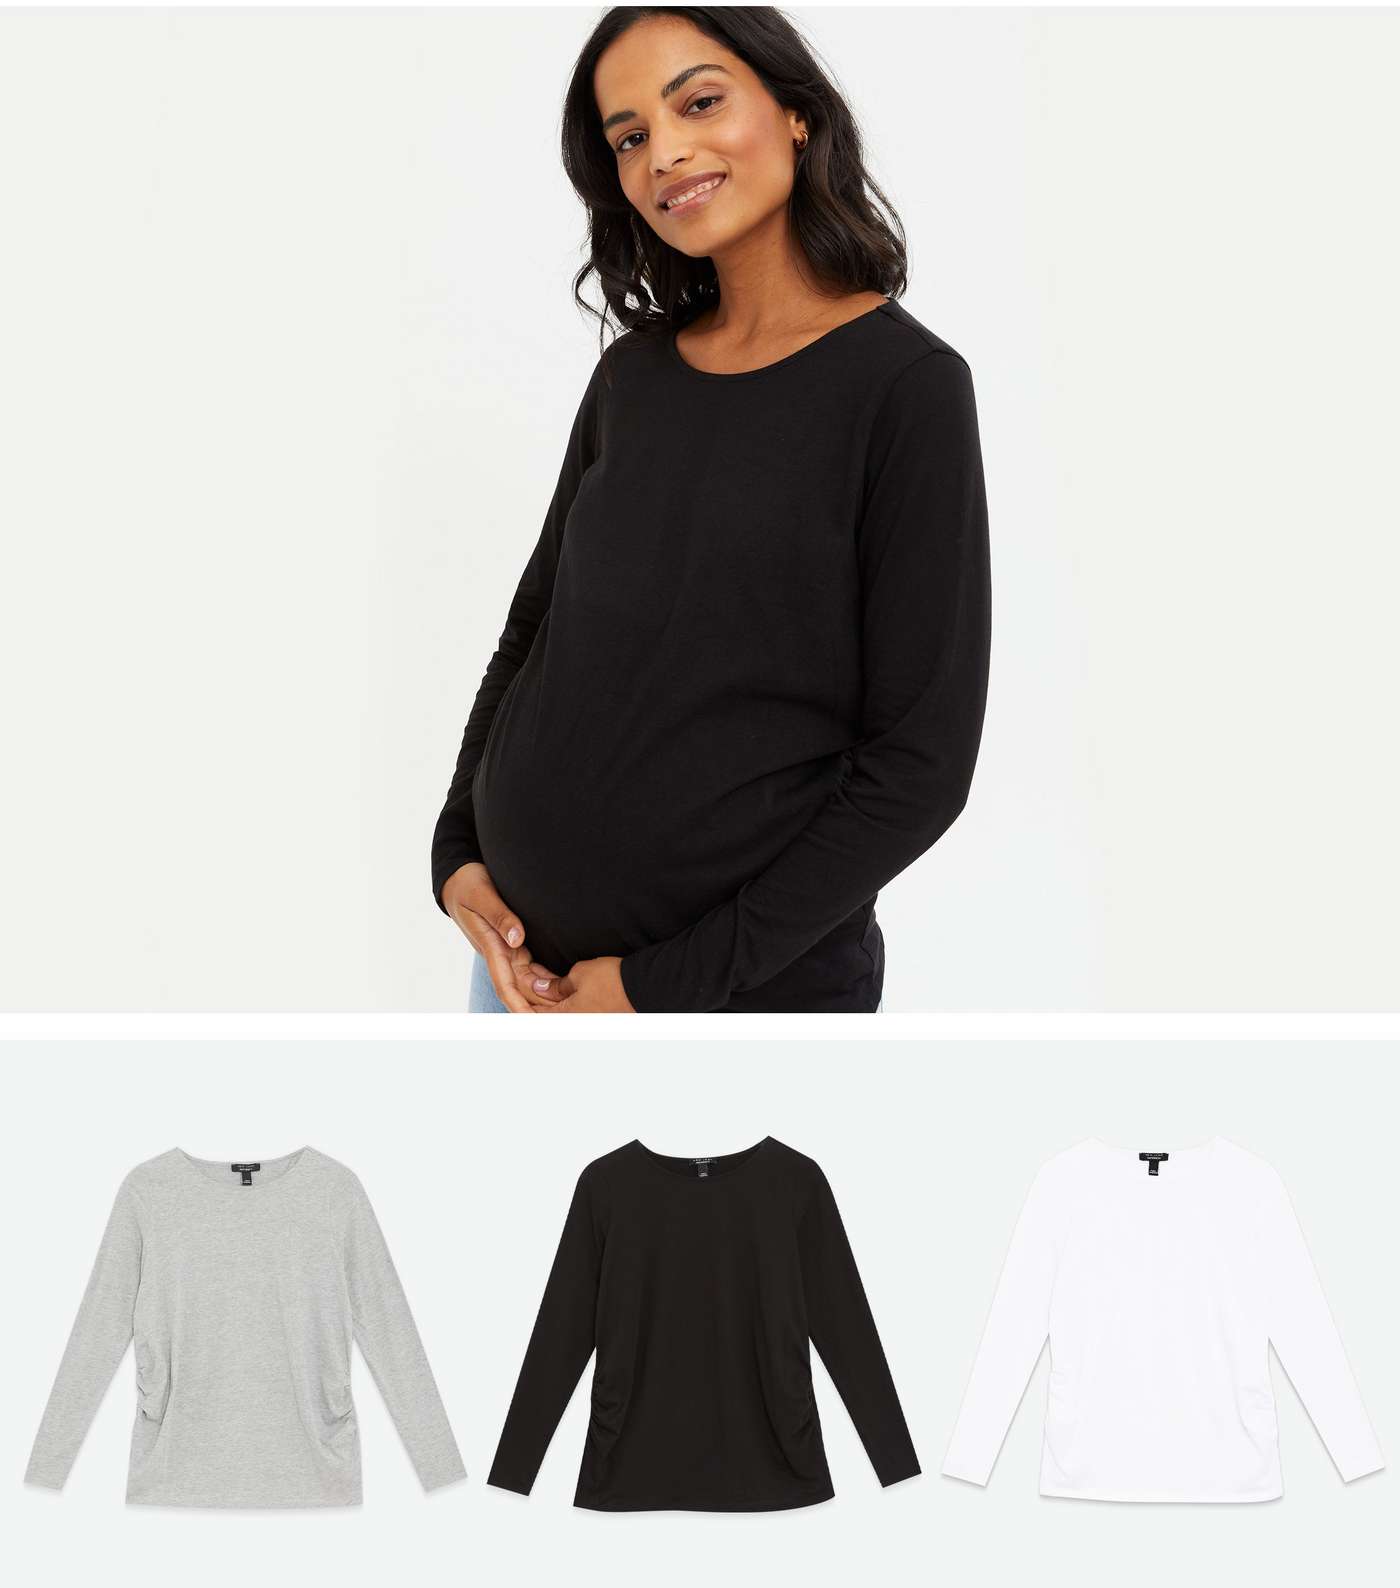 Maternity 3 Pack Black Grey and White Long Sleeve T-Shirts